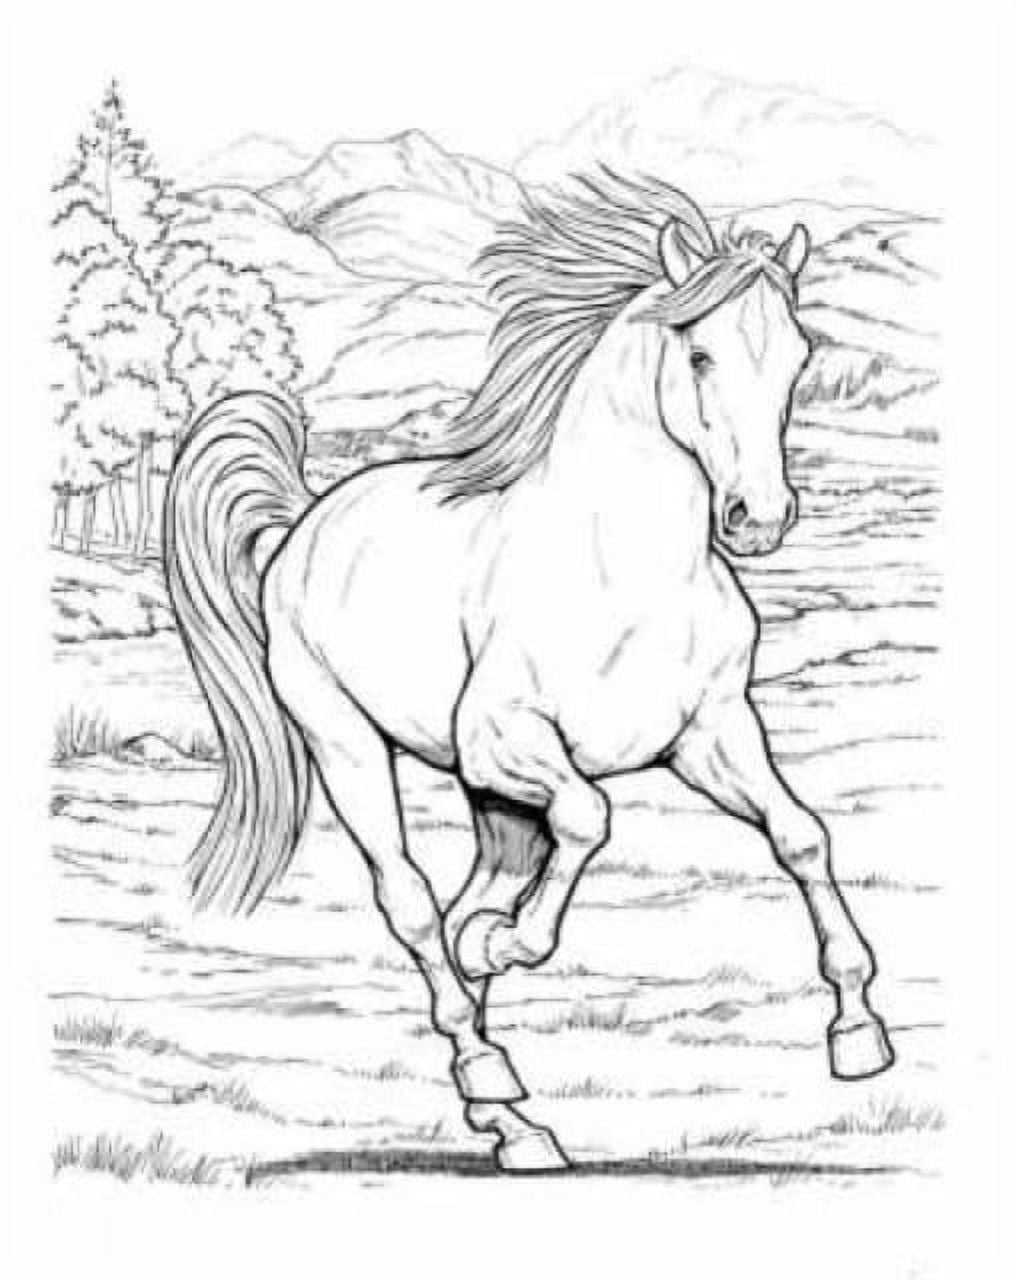 Horses Coloring Book for Kids: Horses Coloring Book for Kids Ages 8-12 The  Ultimate Horse and Pony Activity Gift Book For Boys and Girls with 62+ Des  (Paperback)